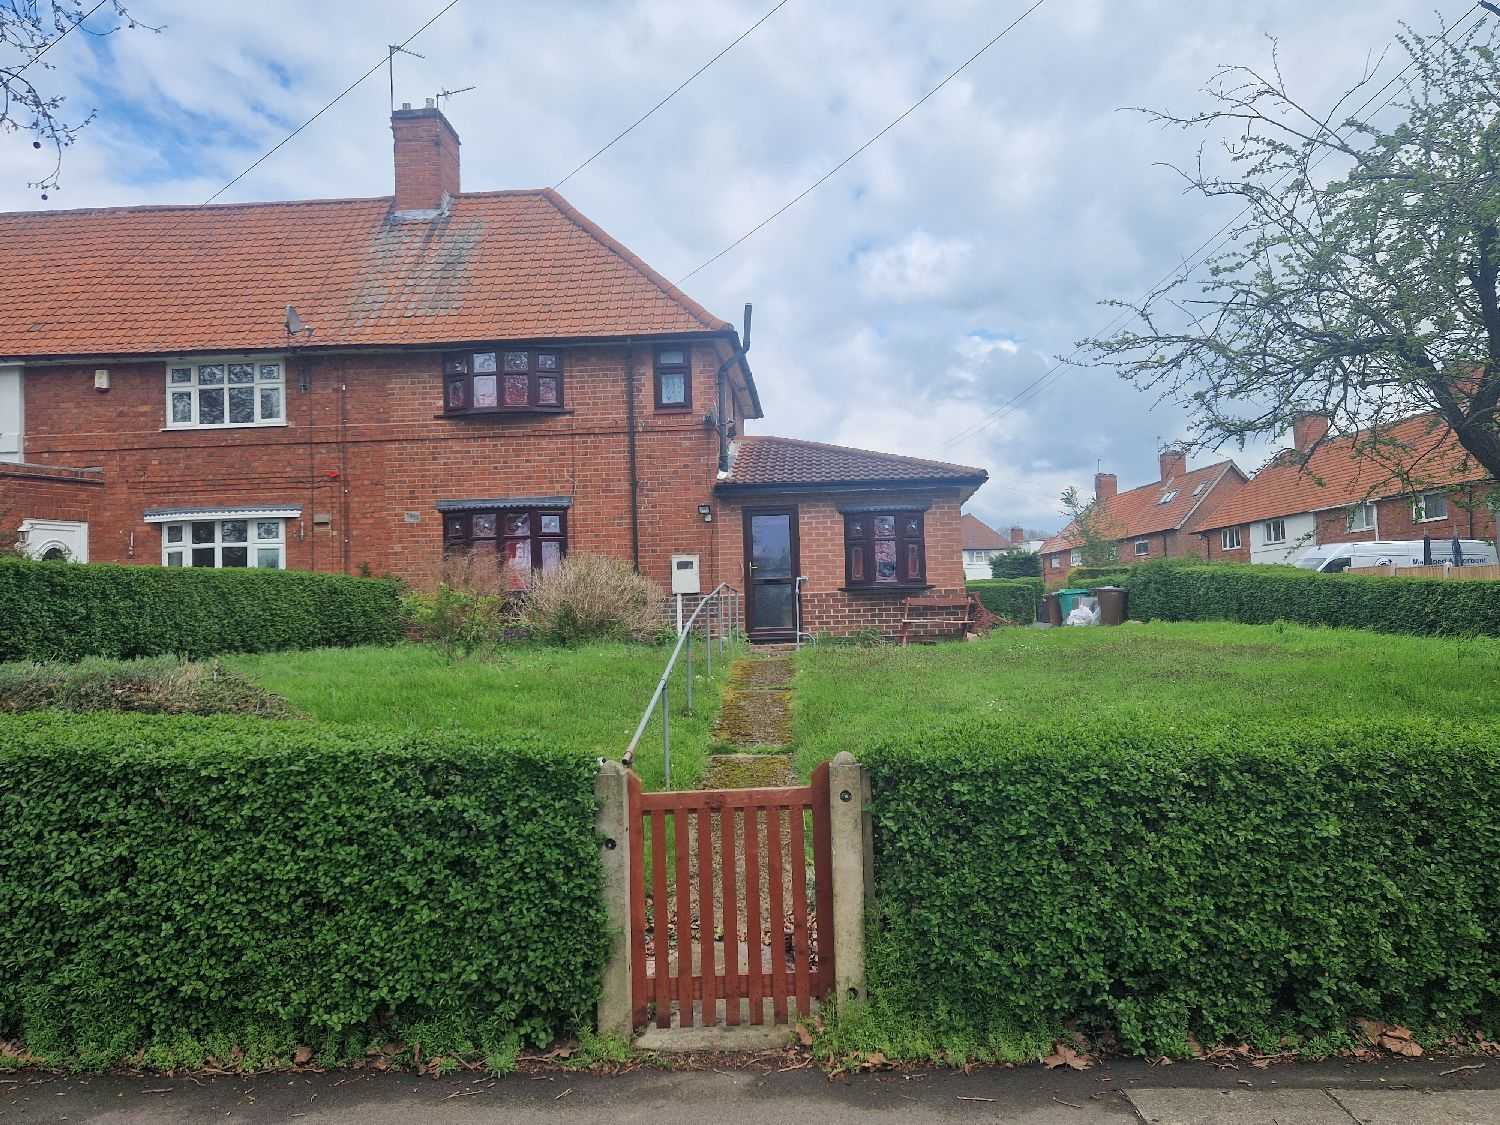 House in Toton, Derbyshire 11723047